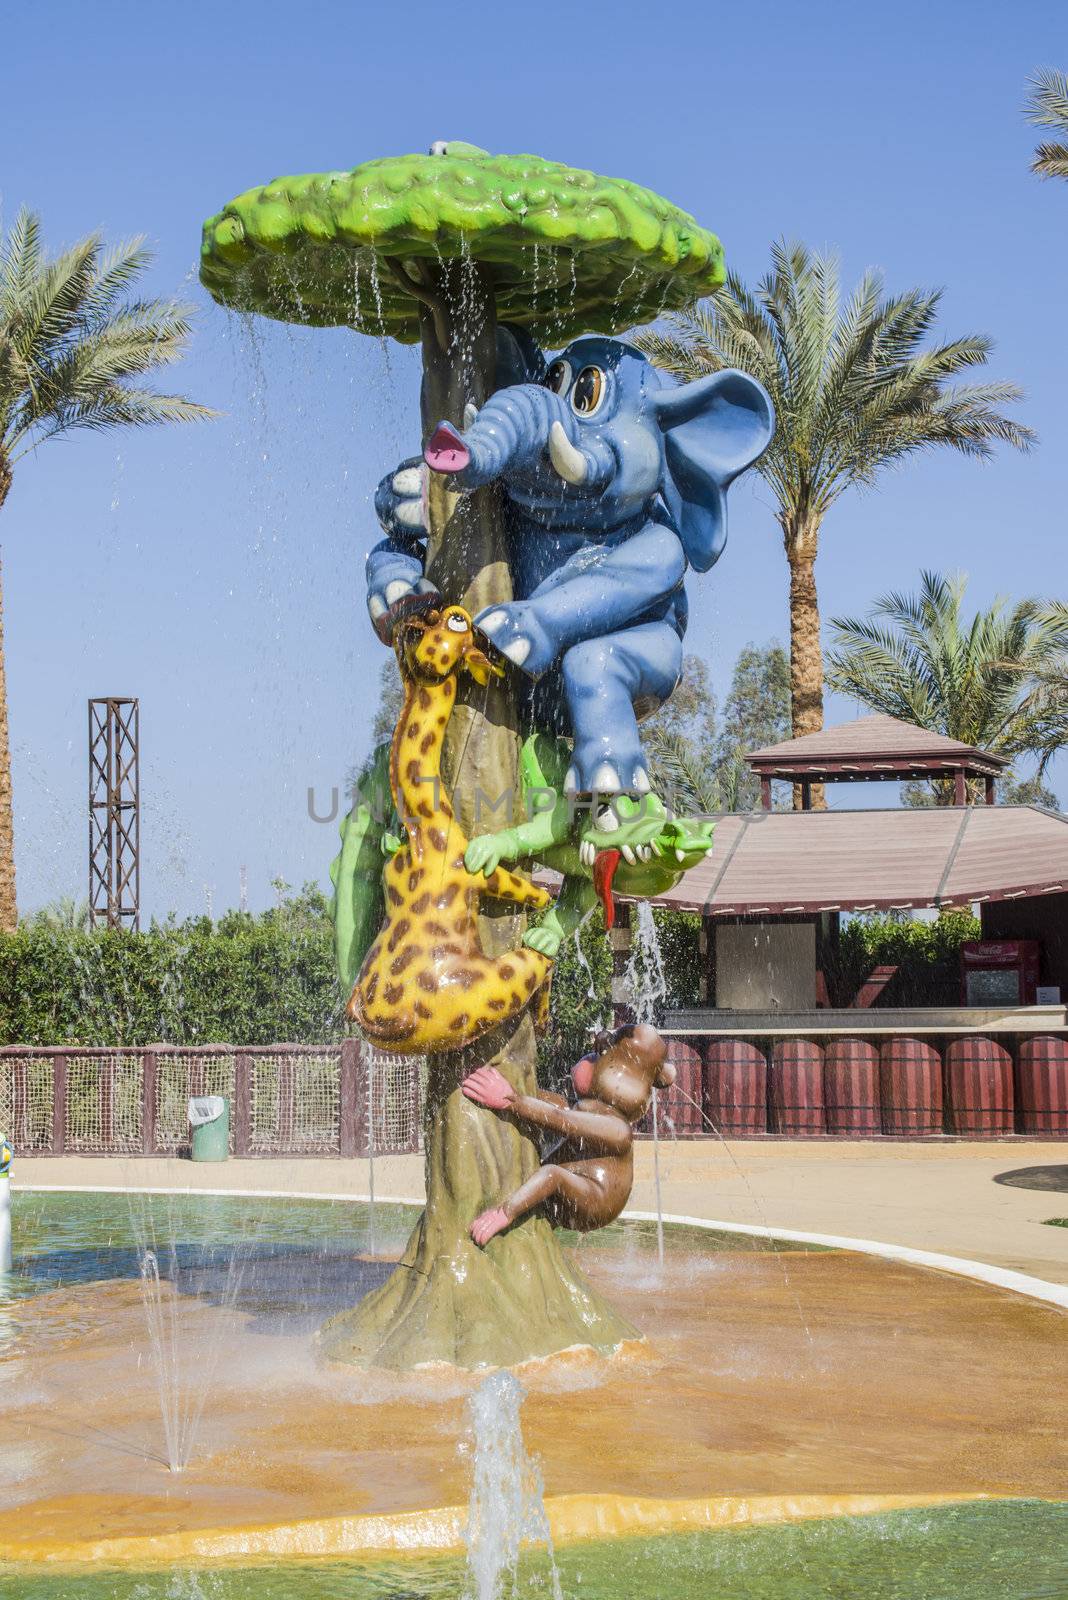 The picture is shot in a water park in Sharm el Sheik, Egypt, April 2013.